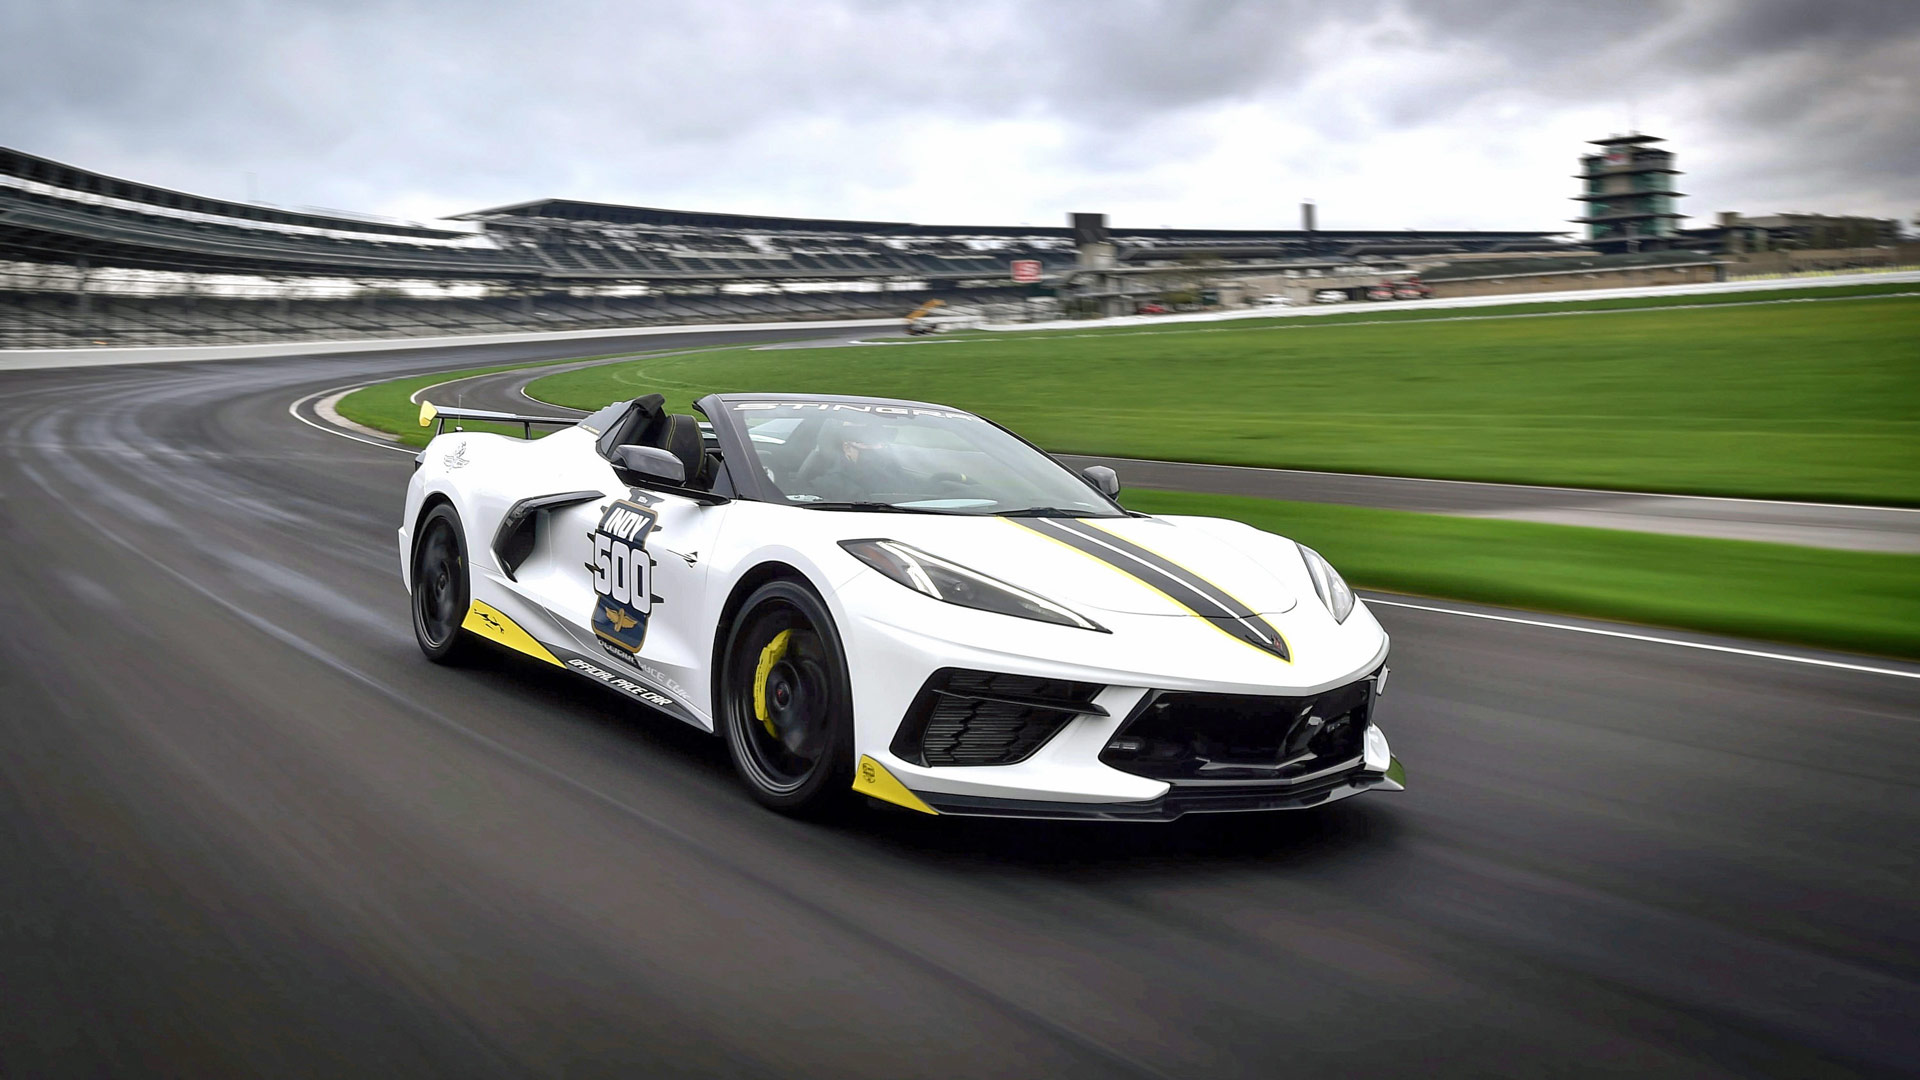 Chevrolet Corvette leads the Indy 500 field… again